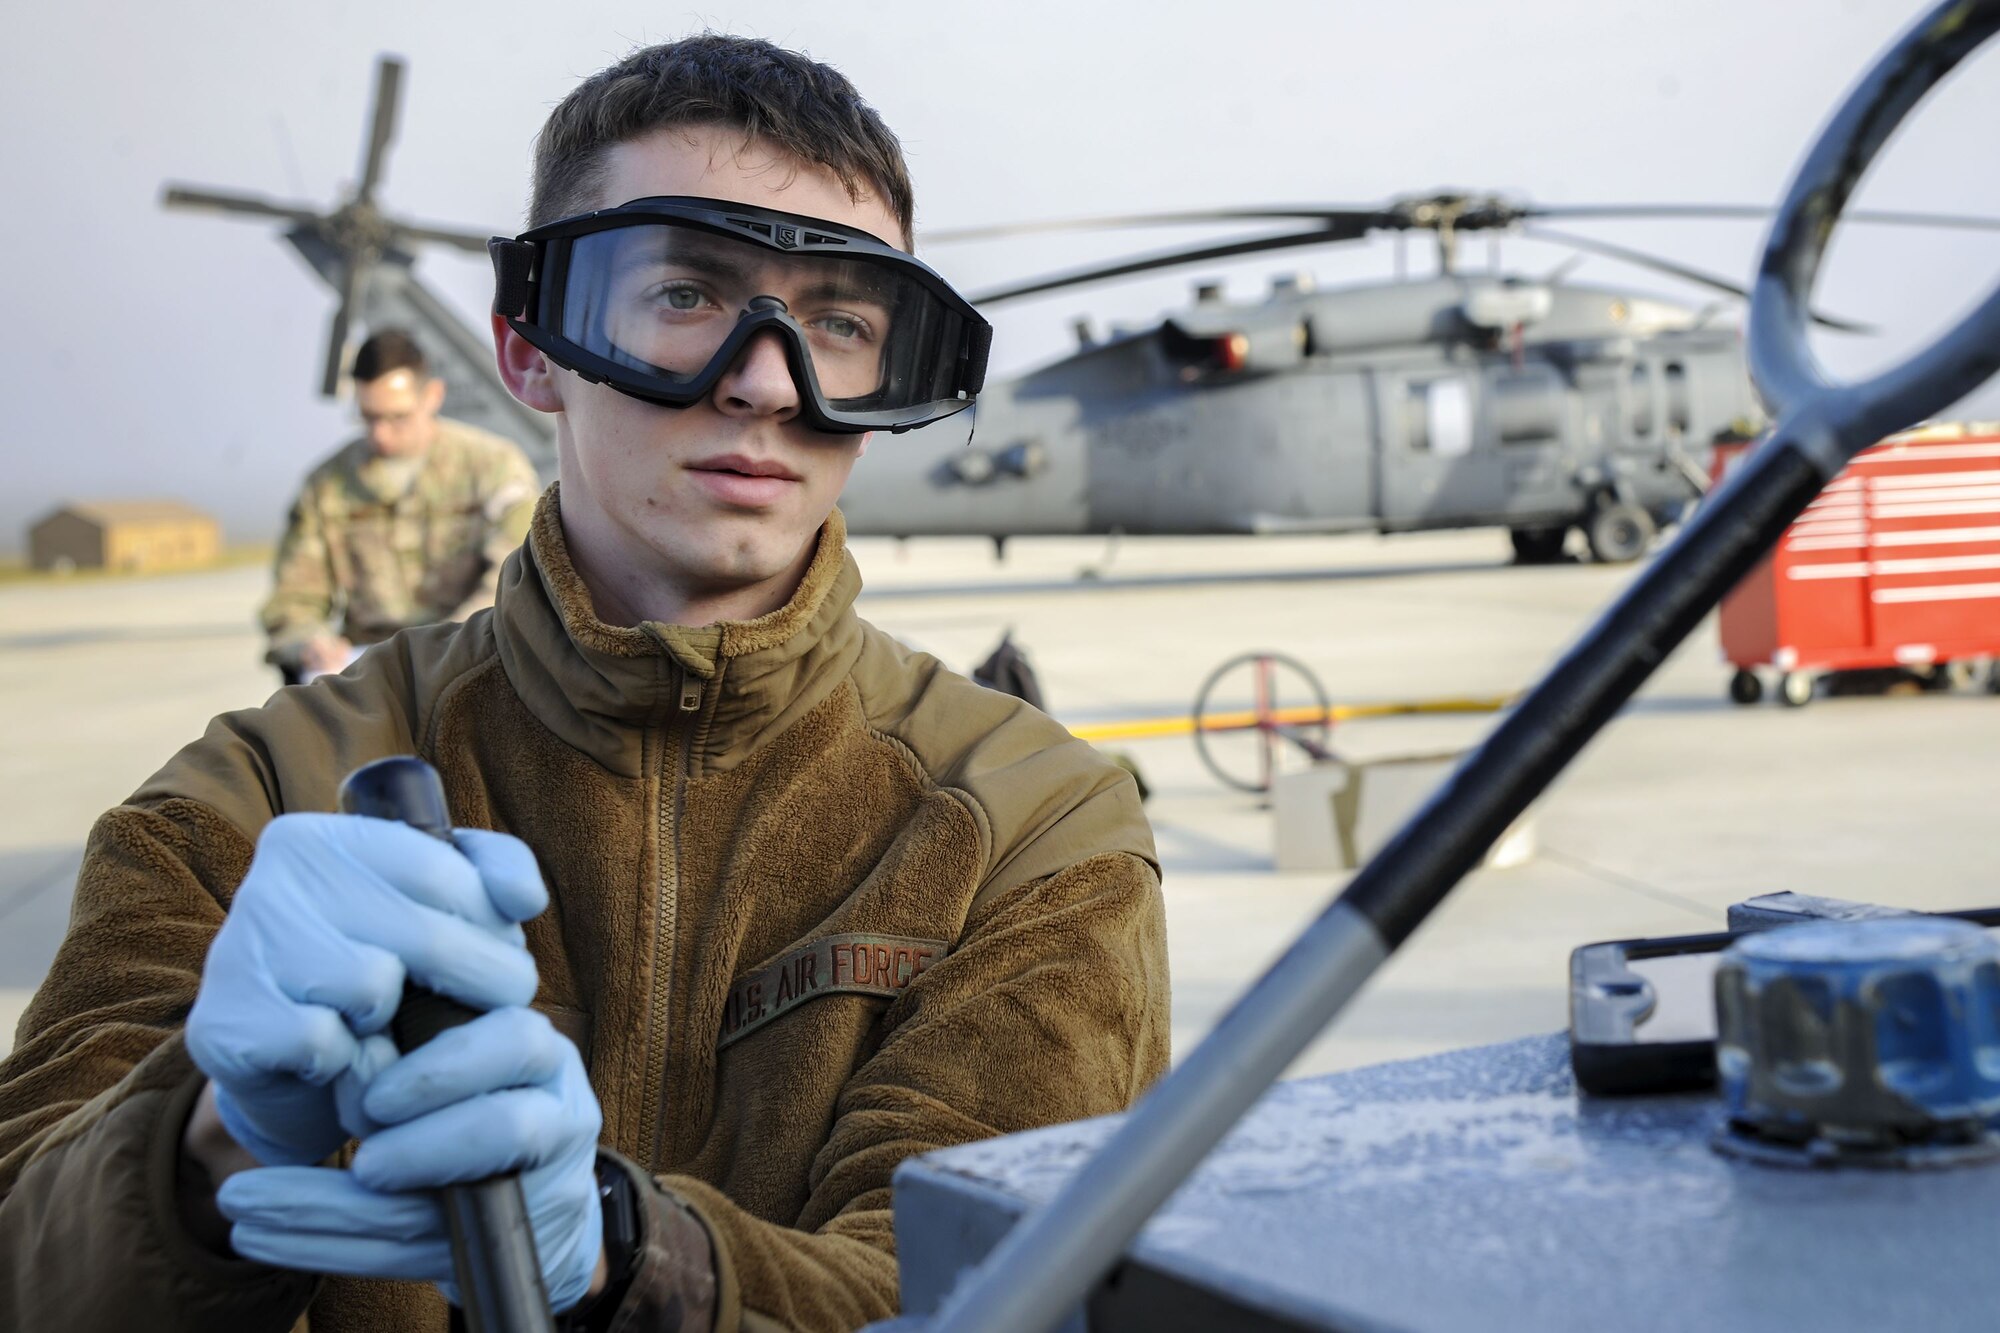 Senior Airman Nicholas Dacyk, 723d Aircraft Maintenance Squadron hydraulics systems apprentice, pulls a lever attached to an HH-60G Pave Hawk, Dec. 5, 2017, at Moody Air Force Base, Ga. As part of a Phase 1, Phase 2 exercise, the 23d Wing is evaluating its operations, maintenance and logistics to determine its readiness to rapidly deploy. Airmen from the 723d Aircraft Maintenance Squadron folded the main and tail rotor blades inward to make it easier to transport and then unfolded the rotors to practice making the helicopter operational. (U.S. Air Force photo by Airman Eugene Oliver)